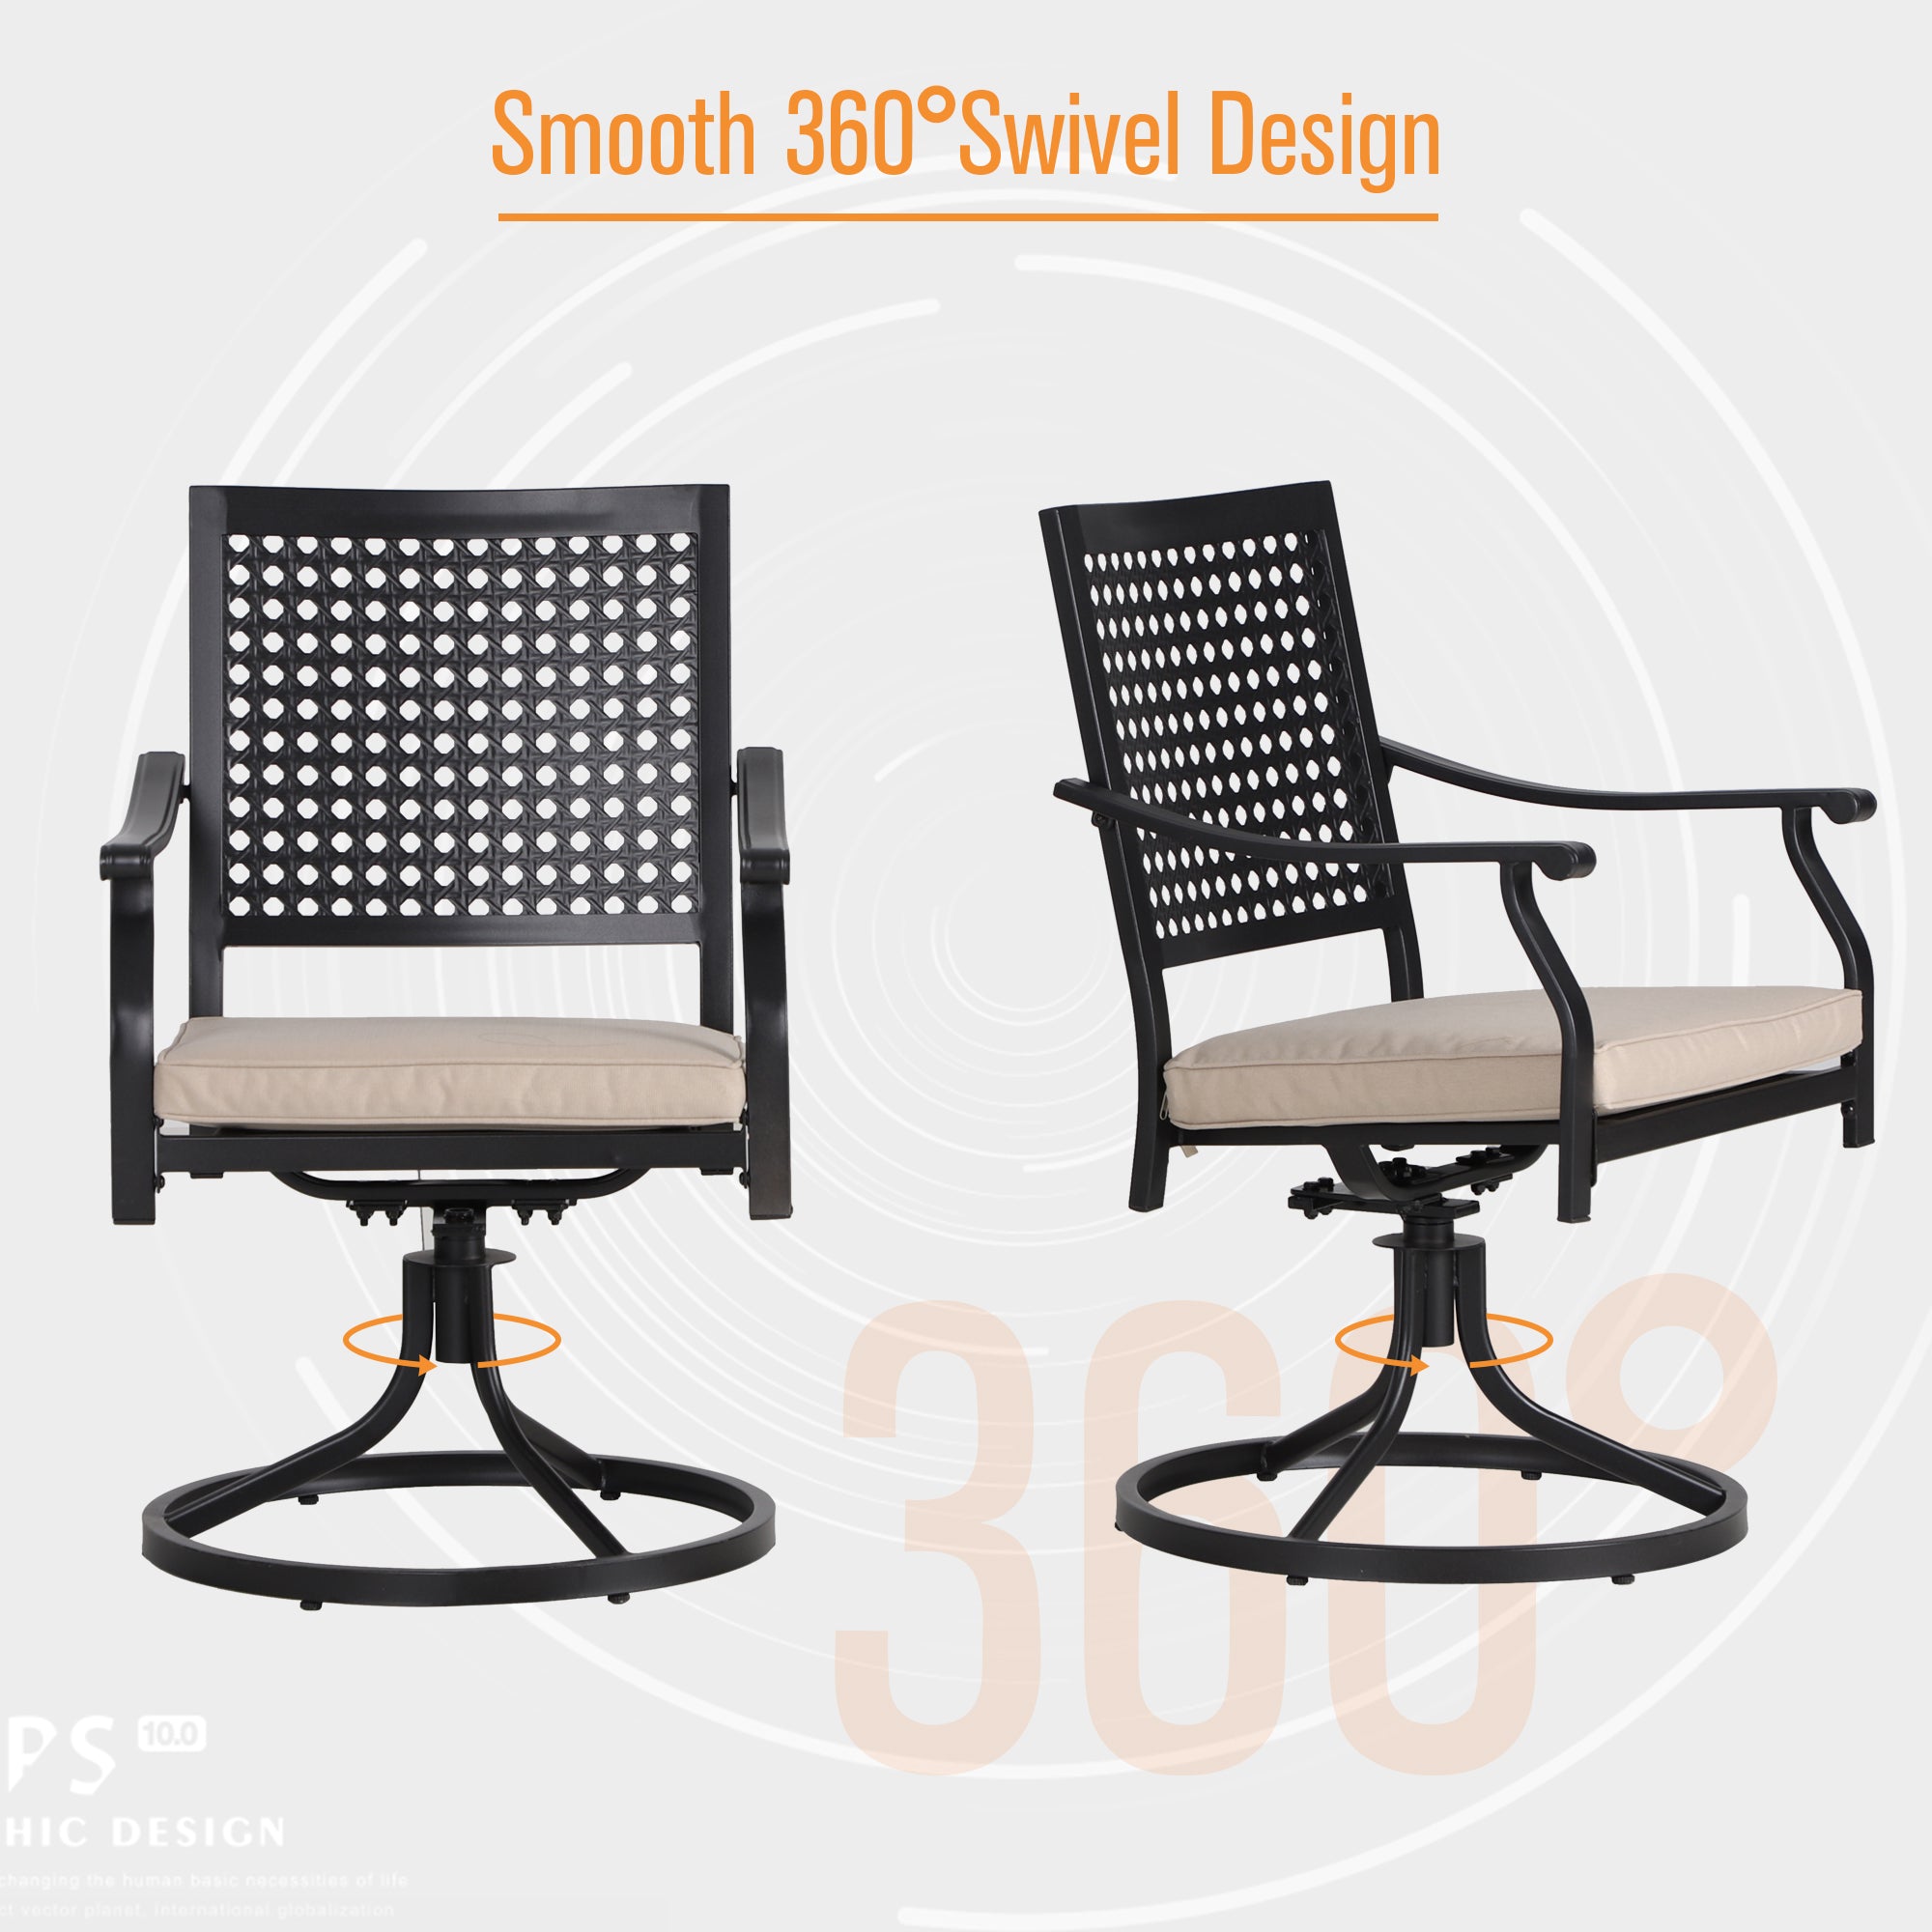 MFSTUDIO Outdoor Dining Set Extendable Steel Table & Bull's Eye Pattern Dining Chairs